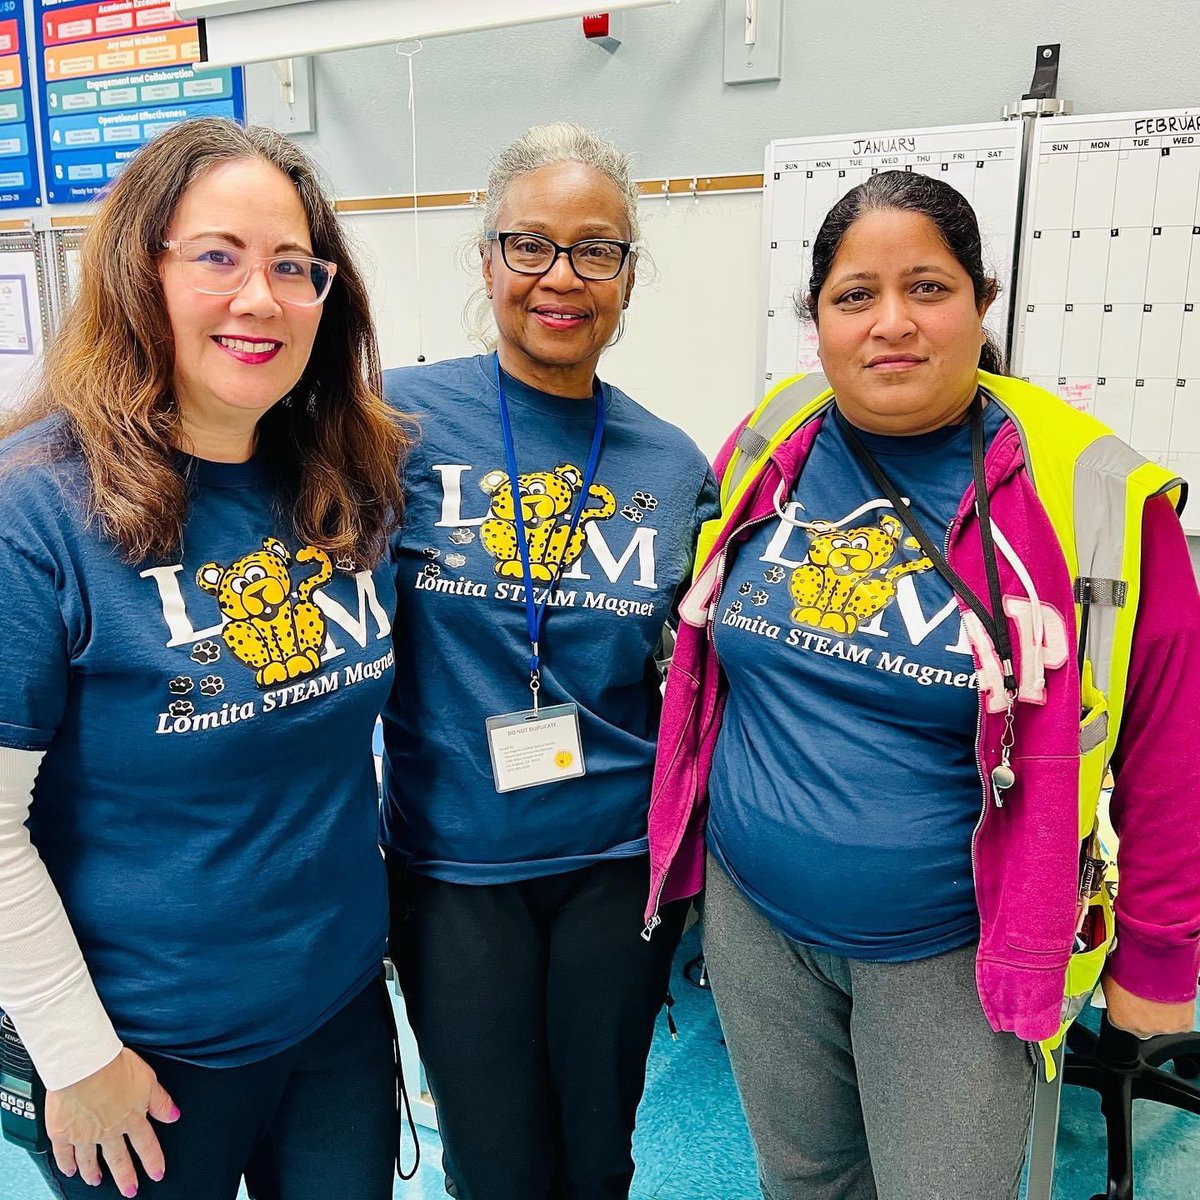 Lomita STEAM Magnet loves and appreciates our family volunteers and staff. Thank you for your support and showing your Leopard Pride! #lomitamagnetrocks #leopardsroar #wearelaunified #IBelieveInLAUSD